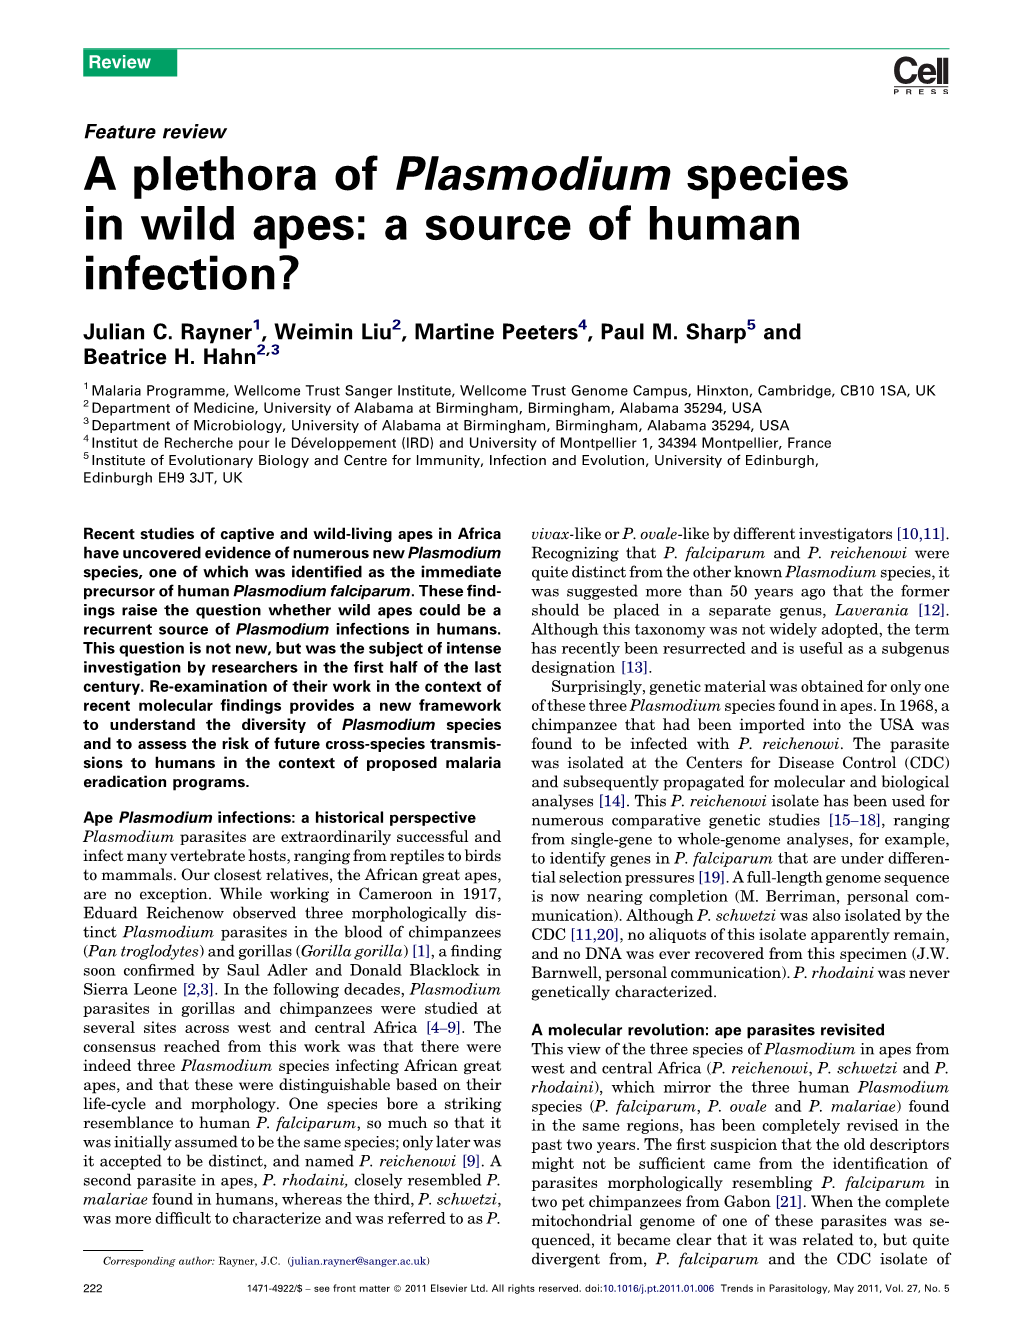 A Plethora of Plasmodium Species in Wild Apes: a Source of Human Infection?